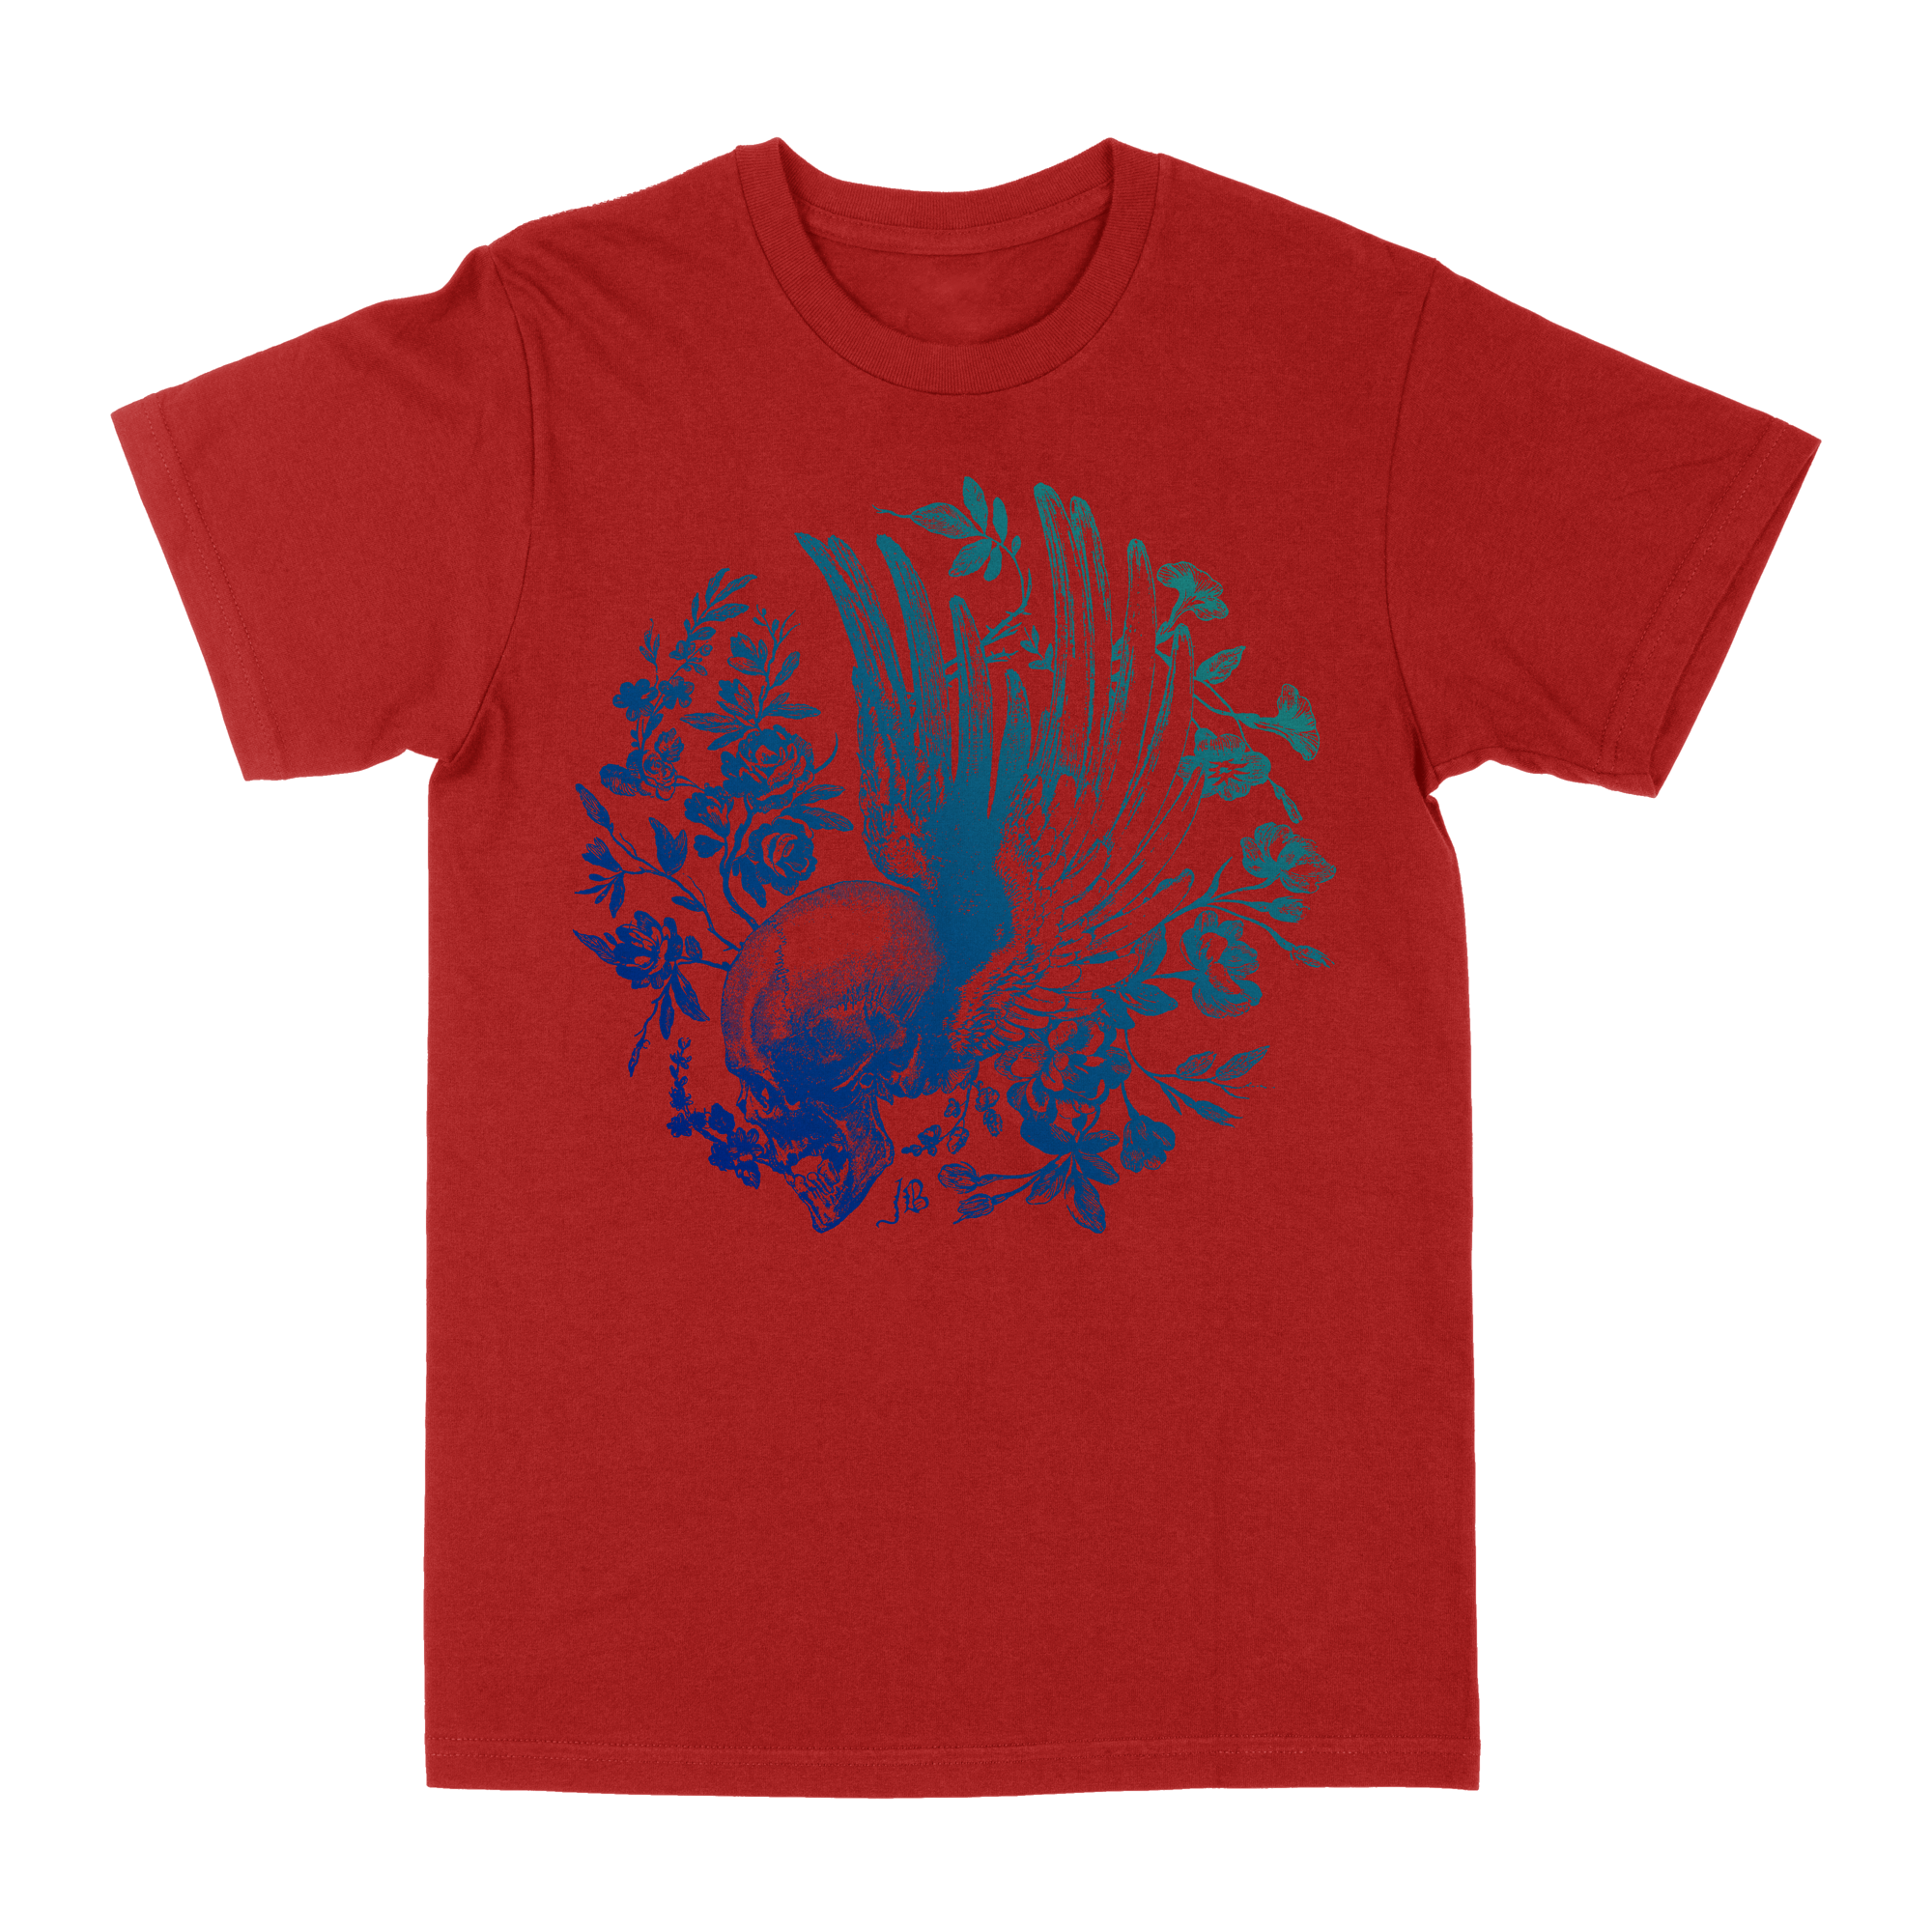 J. Bannon "The Blood: Split Fountain" Red T-Shirt